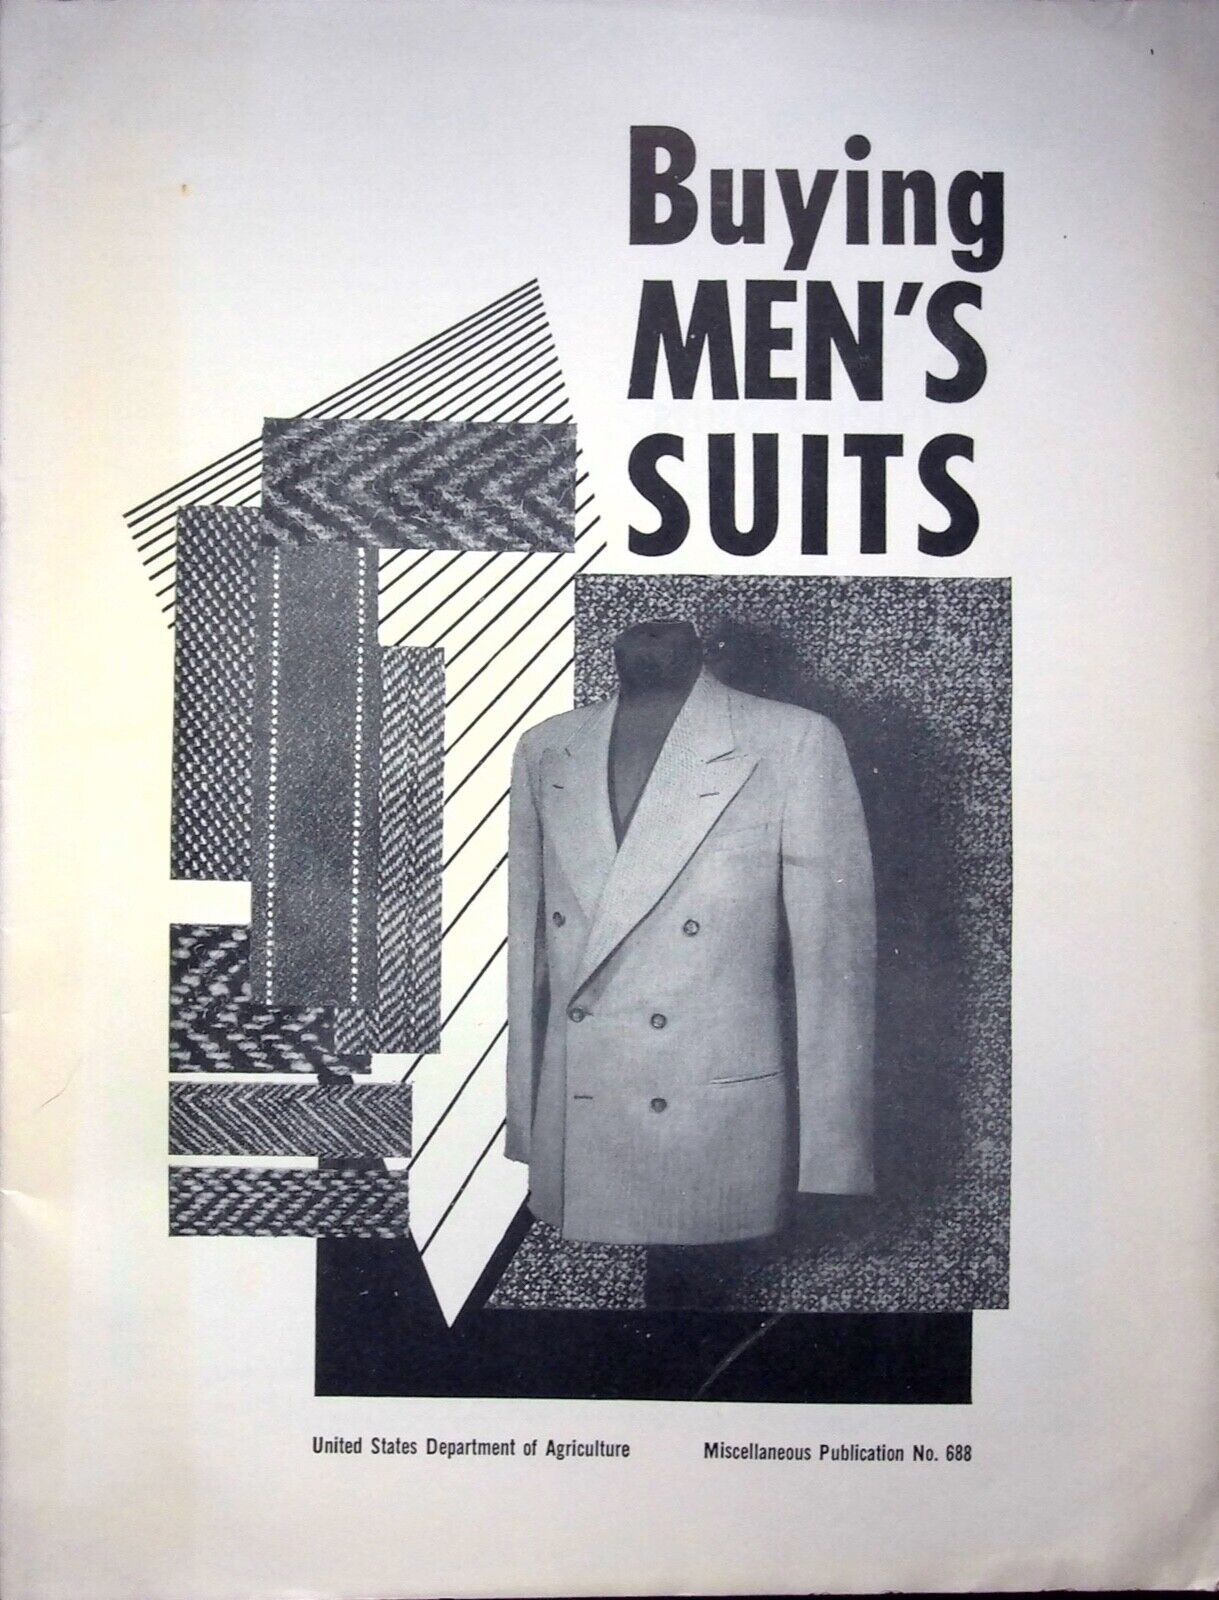 BUYING MEN'S SUITS UNITED STATES DEPARTMENT OF AGRICULTURE 1954